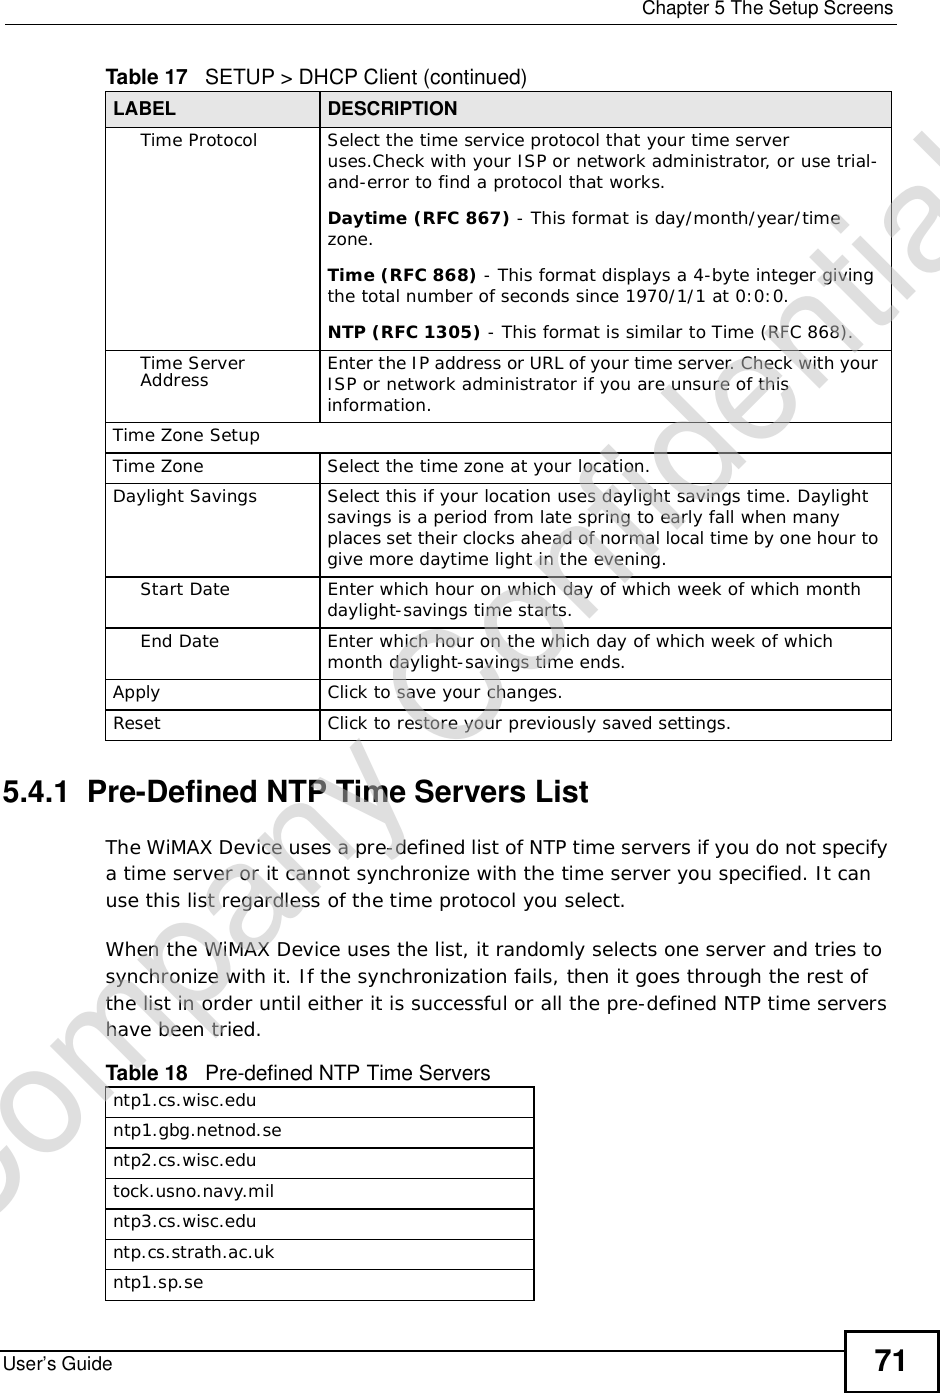  Chapter 5The Setup ScreensUser’s Guide 715.4.1  Pre-Defined NTP Time Servers ListThe WiMAX Device uses a pre-defined list of NTP time servers if you do not specify a time server or it cannot synchronize with the time server you specified. It can use this list regardless of the time protocol you select.When the WiMAX Device uses the list, it randomly selects one server and tries to synchronize with it. If the synchronization fails, then it goes through the rest of the list in order until either it is successful or all the pre-defined NTP time servers have been tried. Time ProtocolSelect the time service protocol that your time server uses.Check with your ISP or network administrator, or use trial-and-error to find a protocol that works.Daytime (RFC 867) - This format is day/month/year/time zone.Time (RFC 868) - This format displays a 4-byte integer giving the total number of seconds since 1970/1/1 at 0:0:0.NTP (RFC 1305) - This format is similar to Time (RFC 868).Time Server Address Enter the IP address or URL of your time server. Check with your ISP or network administrator if you are unsure of this information.Time Zone SetupTime ZoneSelect the time zone at your location.Daylight SavingsSelect this if your location uses daylight savings time. Daylight savings is a period from late spring to early fall when many places set their clocks ahead of normal local time by one hour to give more daytime light in the evening.Start DateEnter which hour on which day of which week of which month daylight-savings time starts.End DateEnter which hour on the which day of which week of which month daylight-savings time ends.Apply Click to save your changes.Reset Click to restore your previously saved settings.Table 17   SETUP &gt; DHCP Client (continued)LABEL DESCRIPTIONTable 18   Pre-defined NTP Time Serversntp1.cs.wisc.eduntp1.gbg.netnod.sentp2.cs.wisc.edutock.usno.navy.milntp3.cs.wisc.eduntp.cs.strath.ac.ukntp1.sp.seCompany Confidential